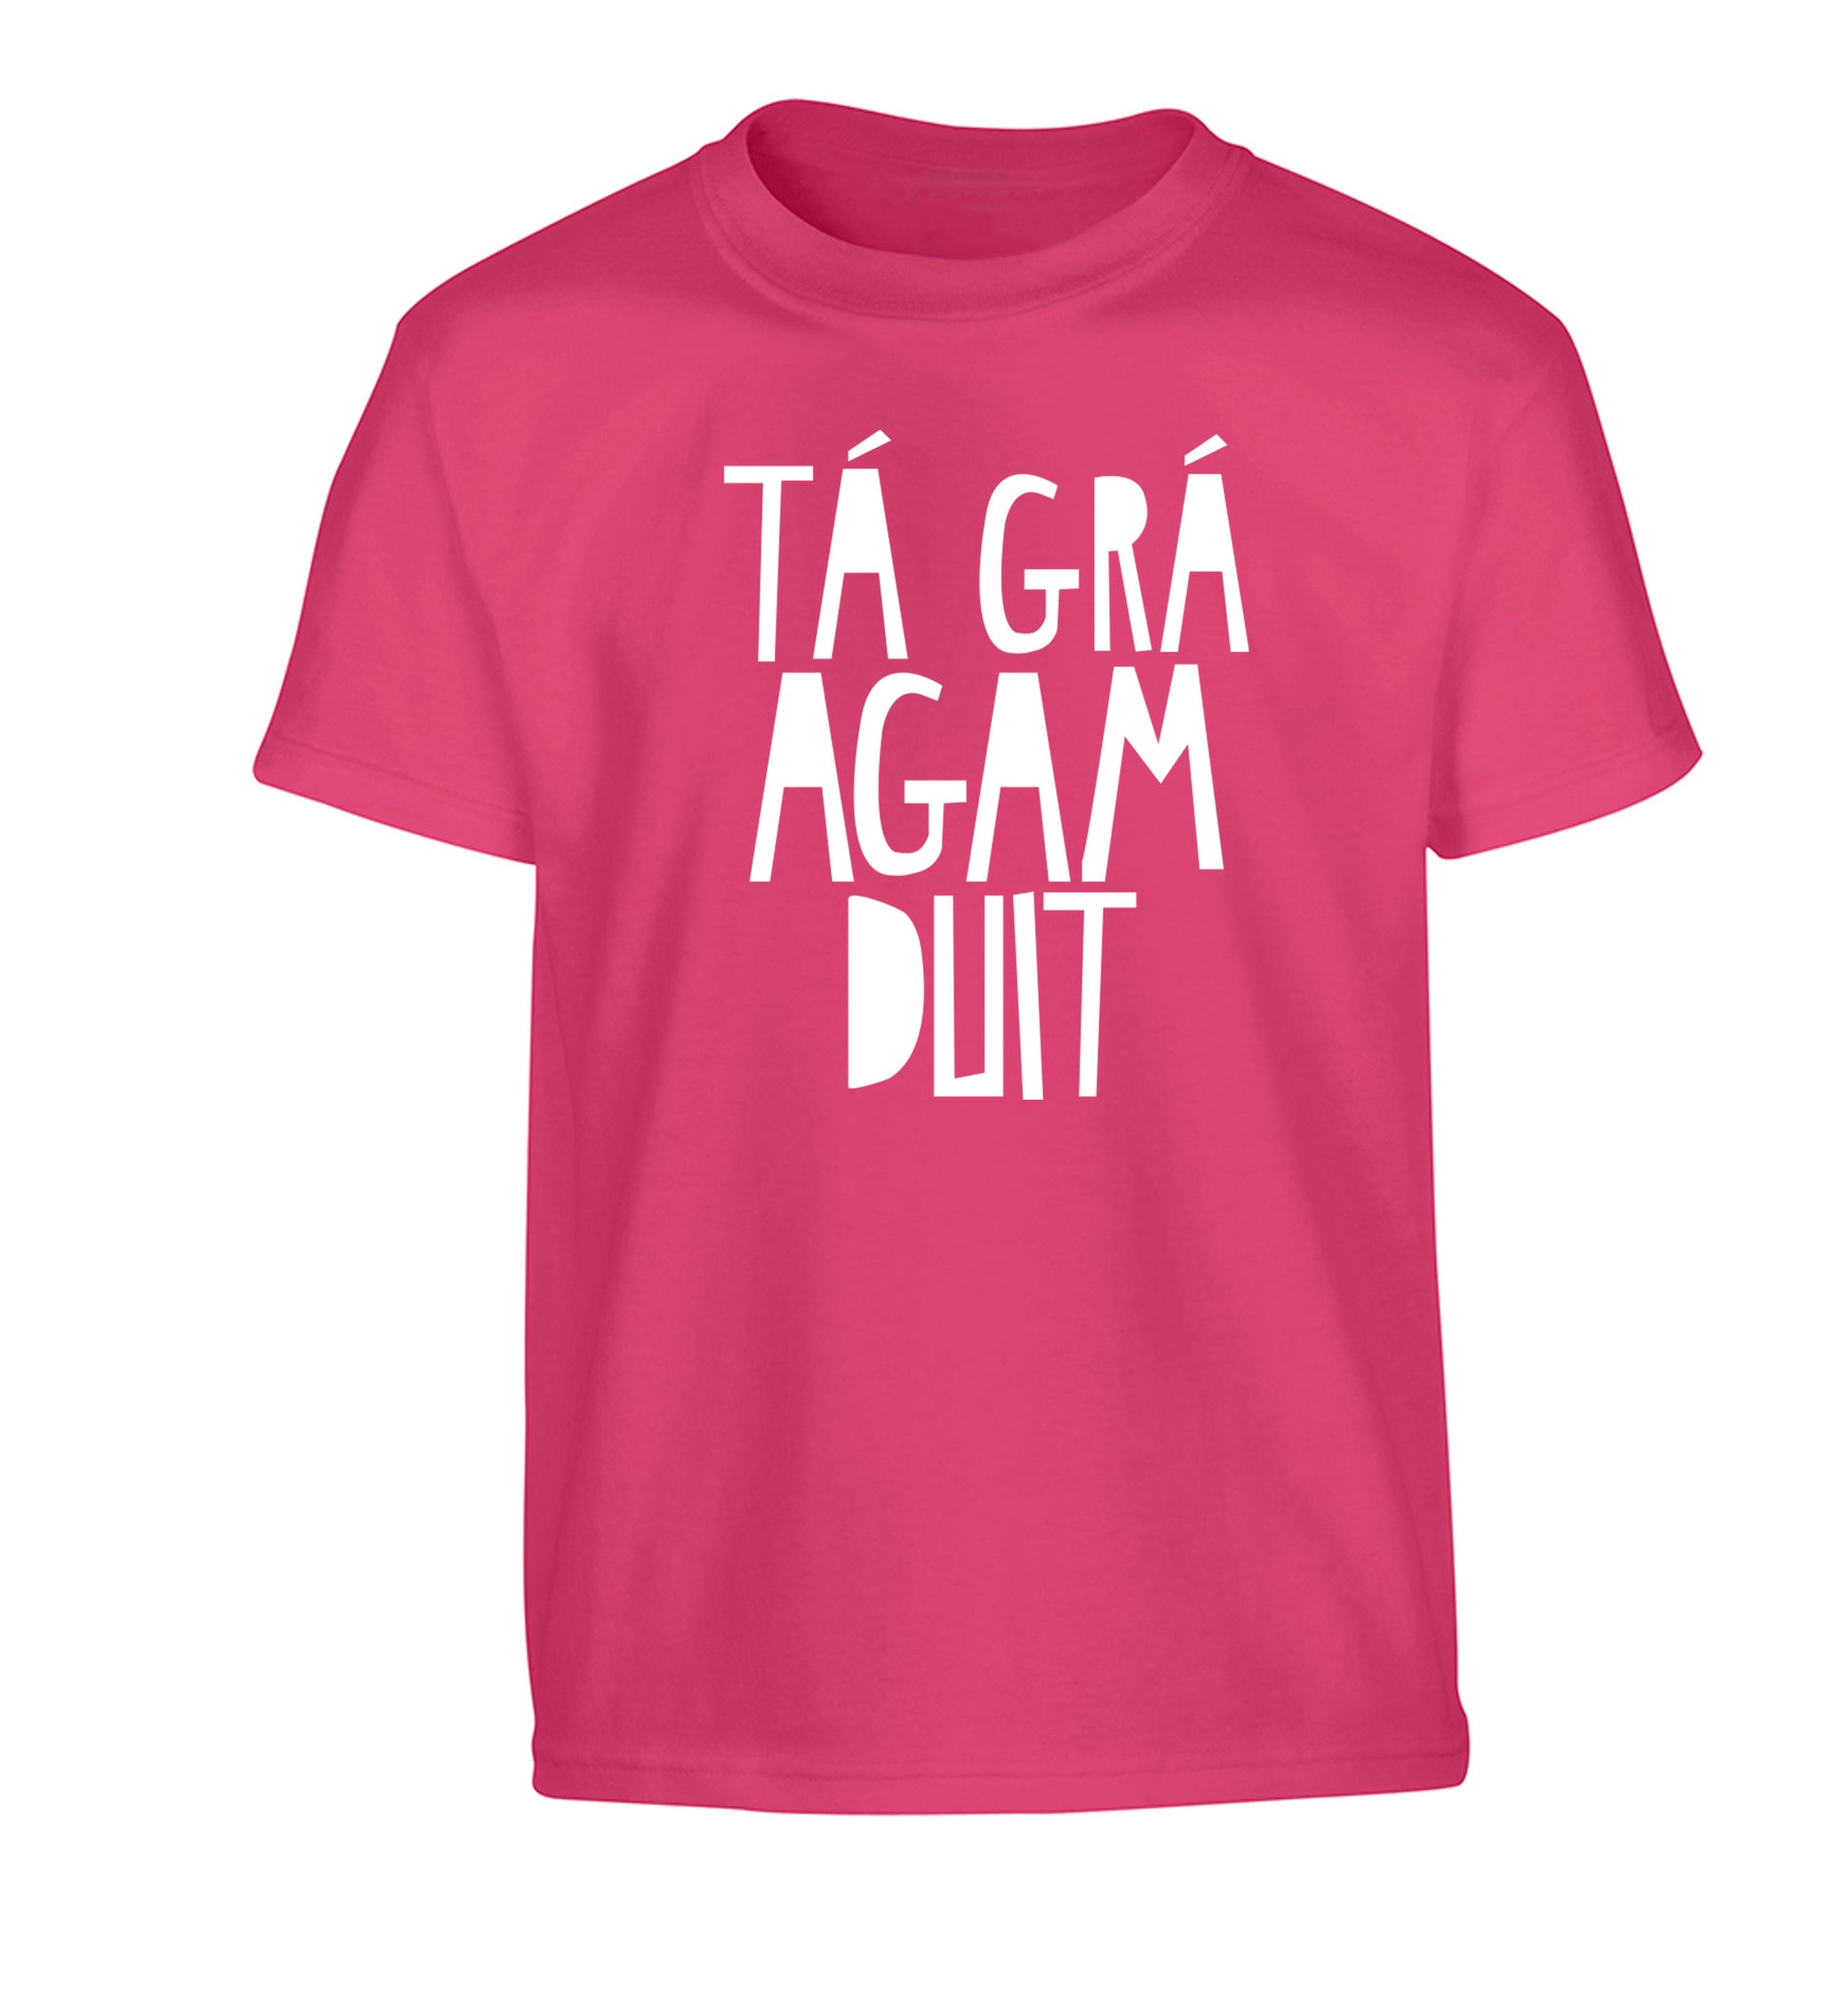 T‡ gr‡ agam duit - I love you Children's pink Tshirt 12-13 Years